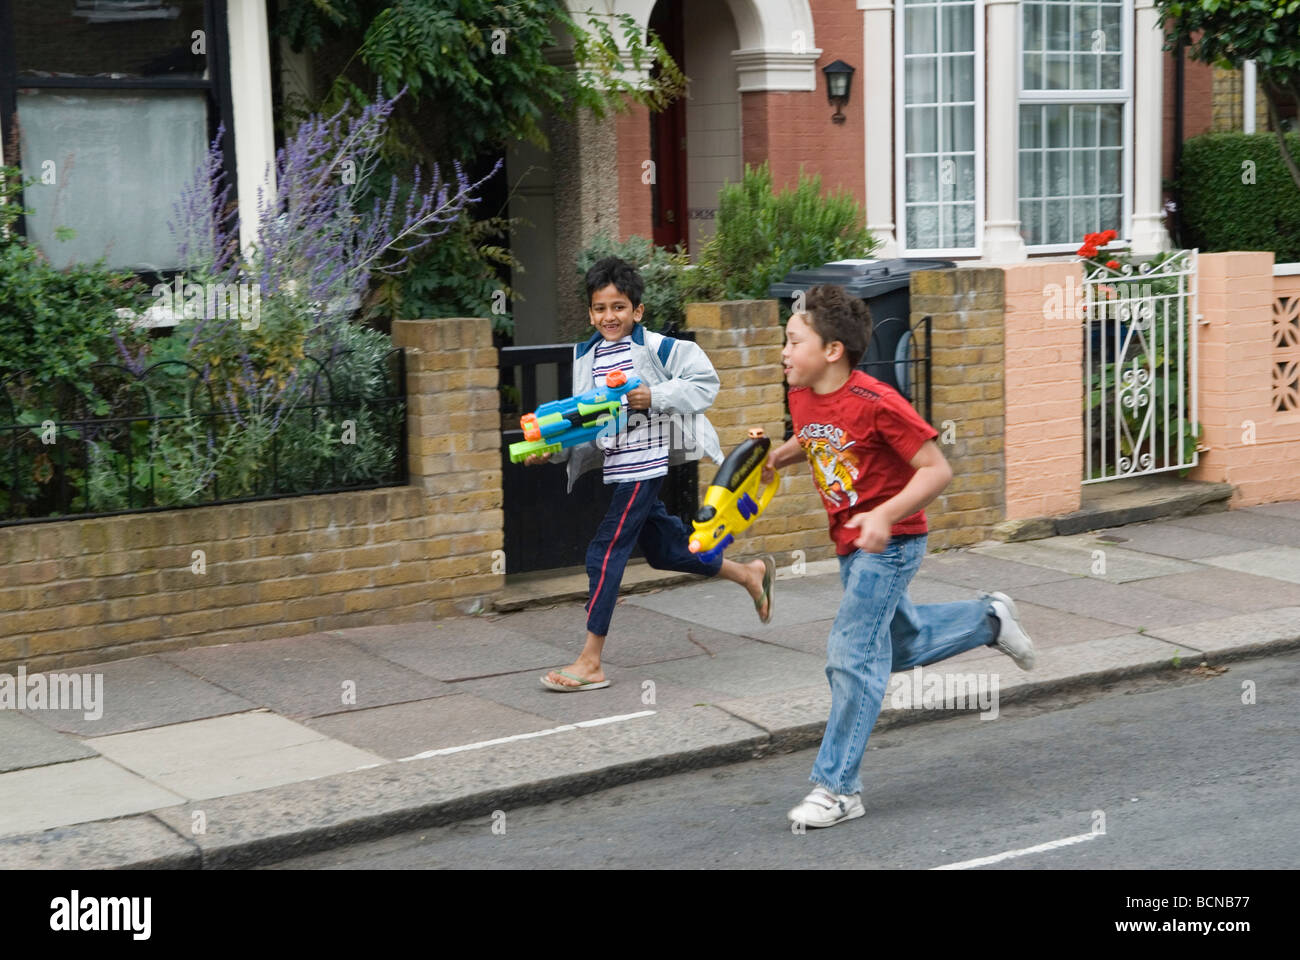 Children playing in Brunswick Street Walthamstow London E17 England with pump action water pistols 2009 2000s UK. HOMER SYKES Stock Photo